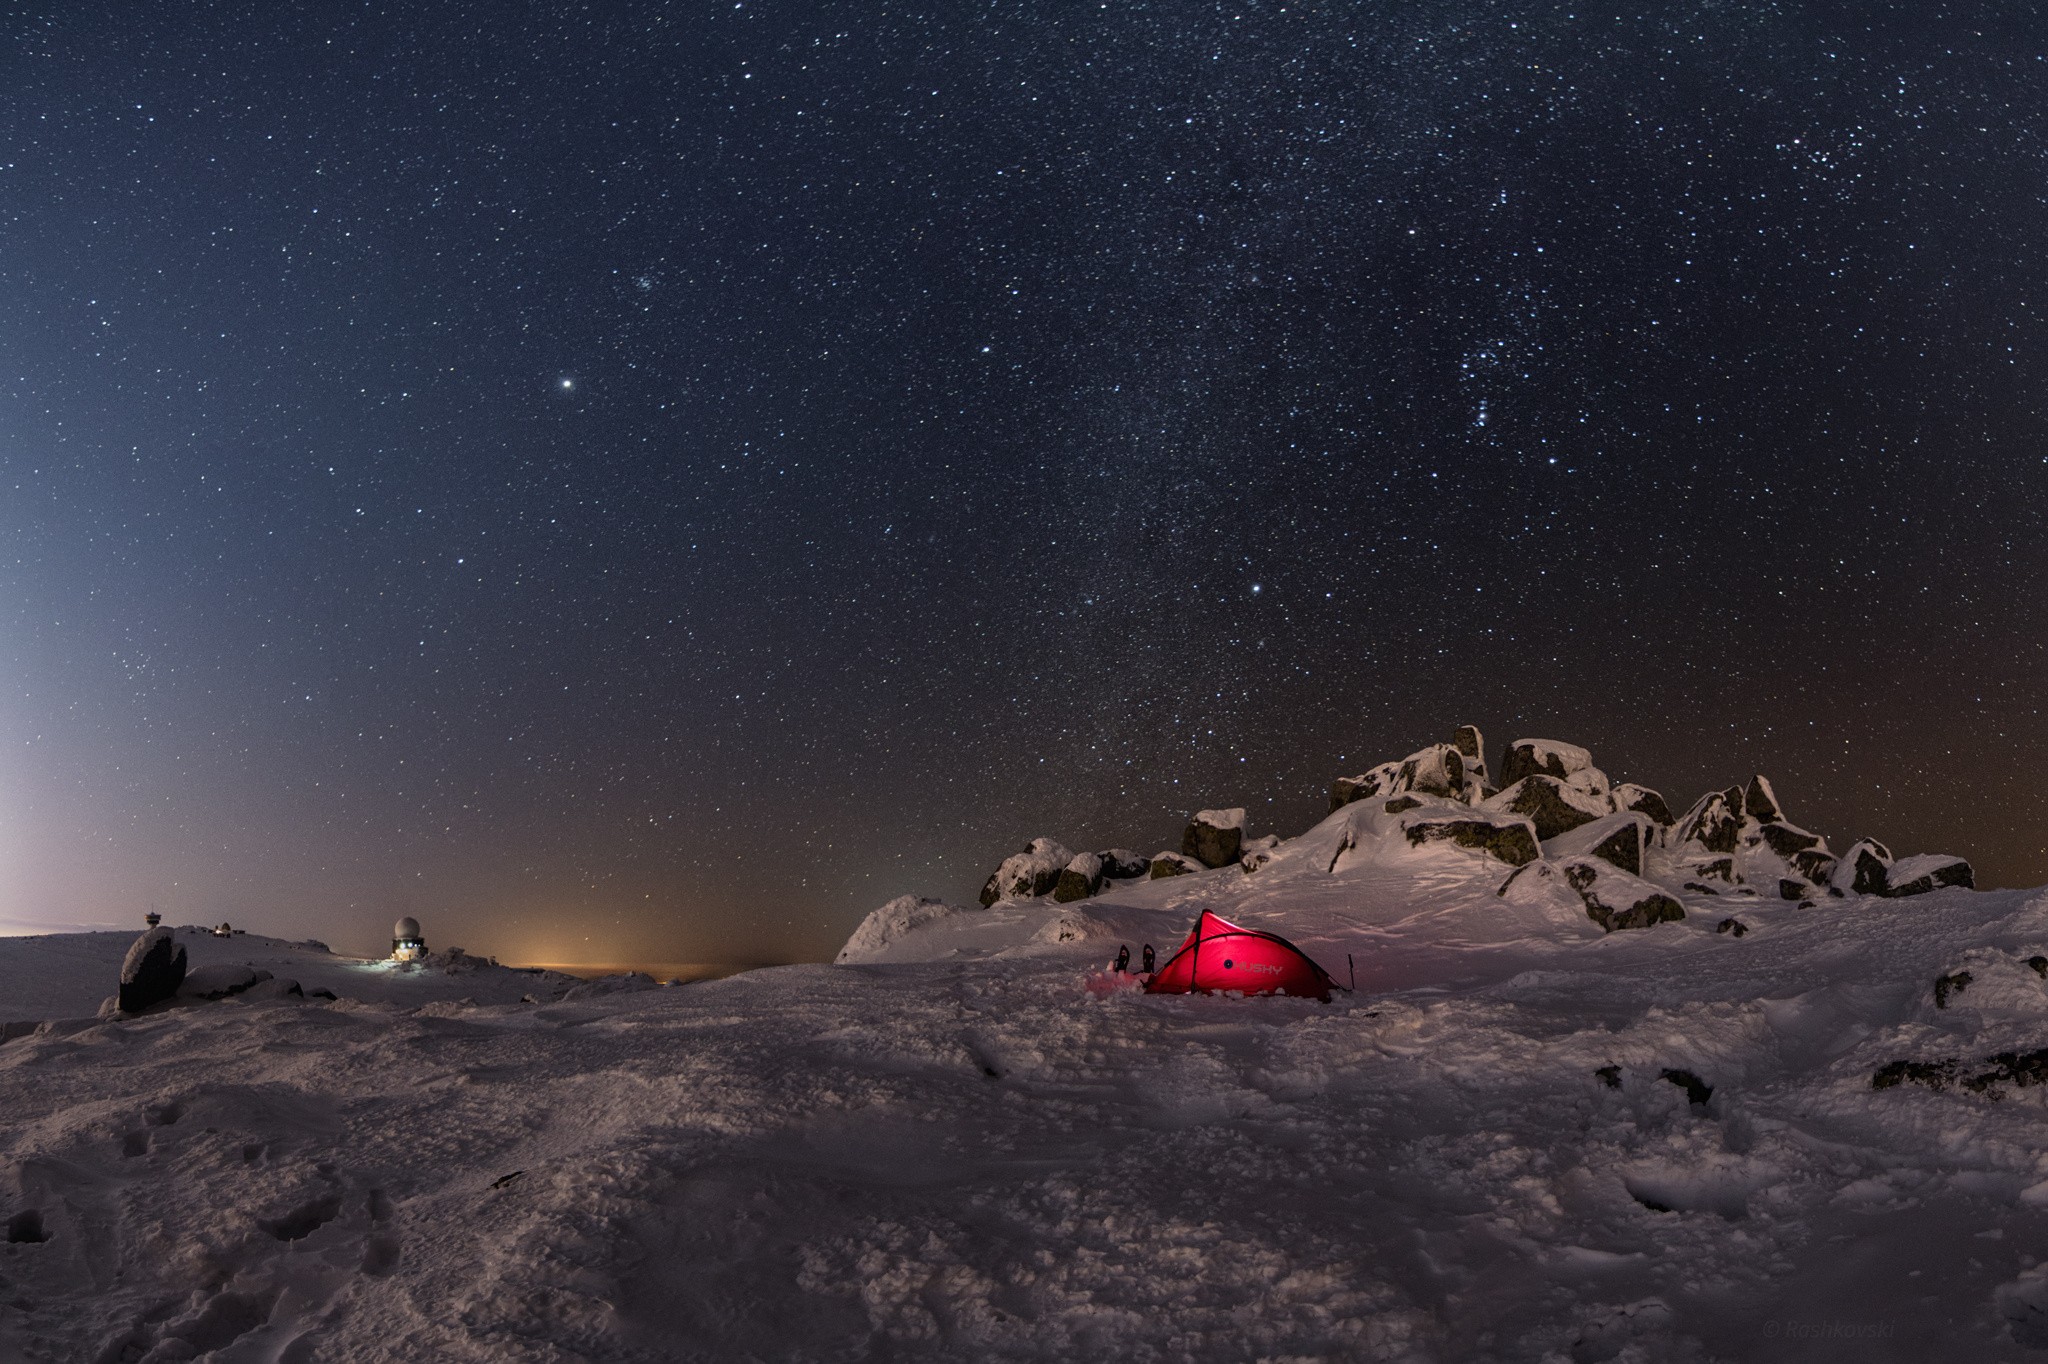 General 2048x1364 stars snow tent landscape mountains sky ice cold winter outdoors nature